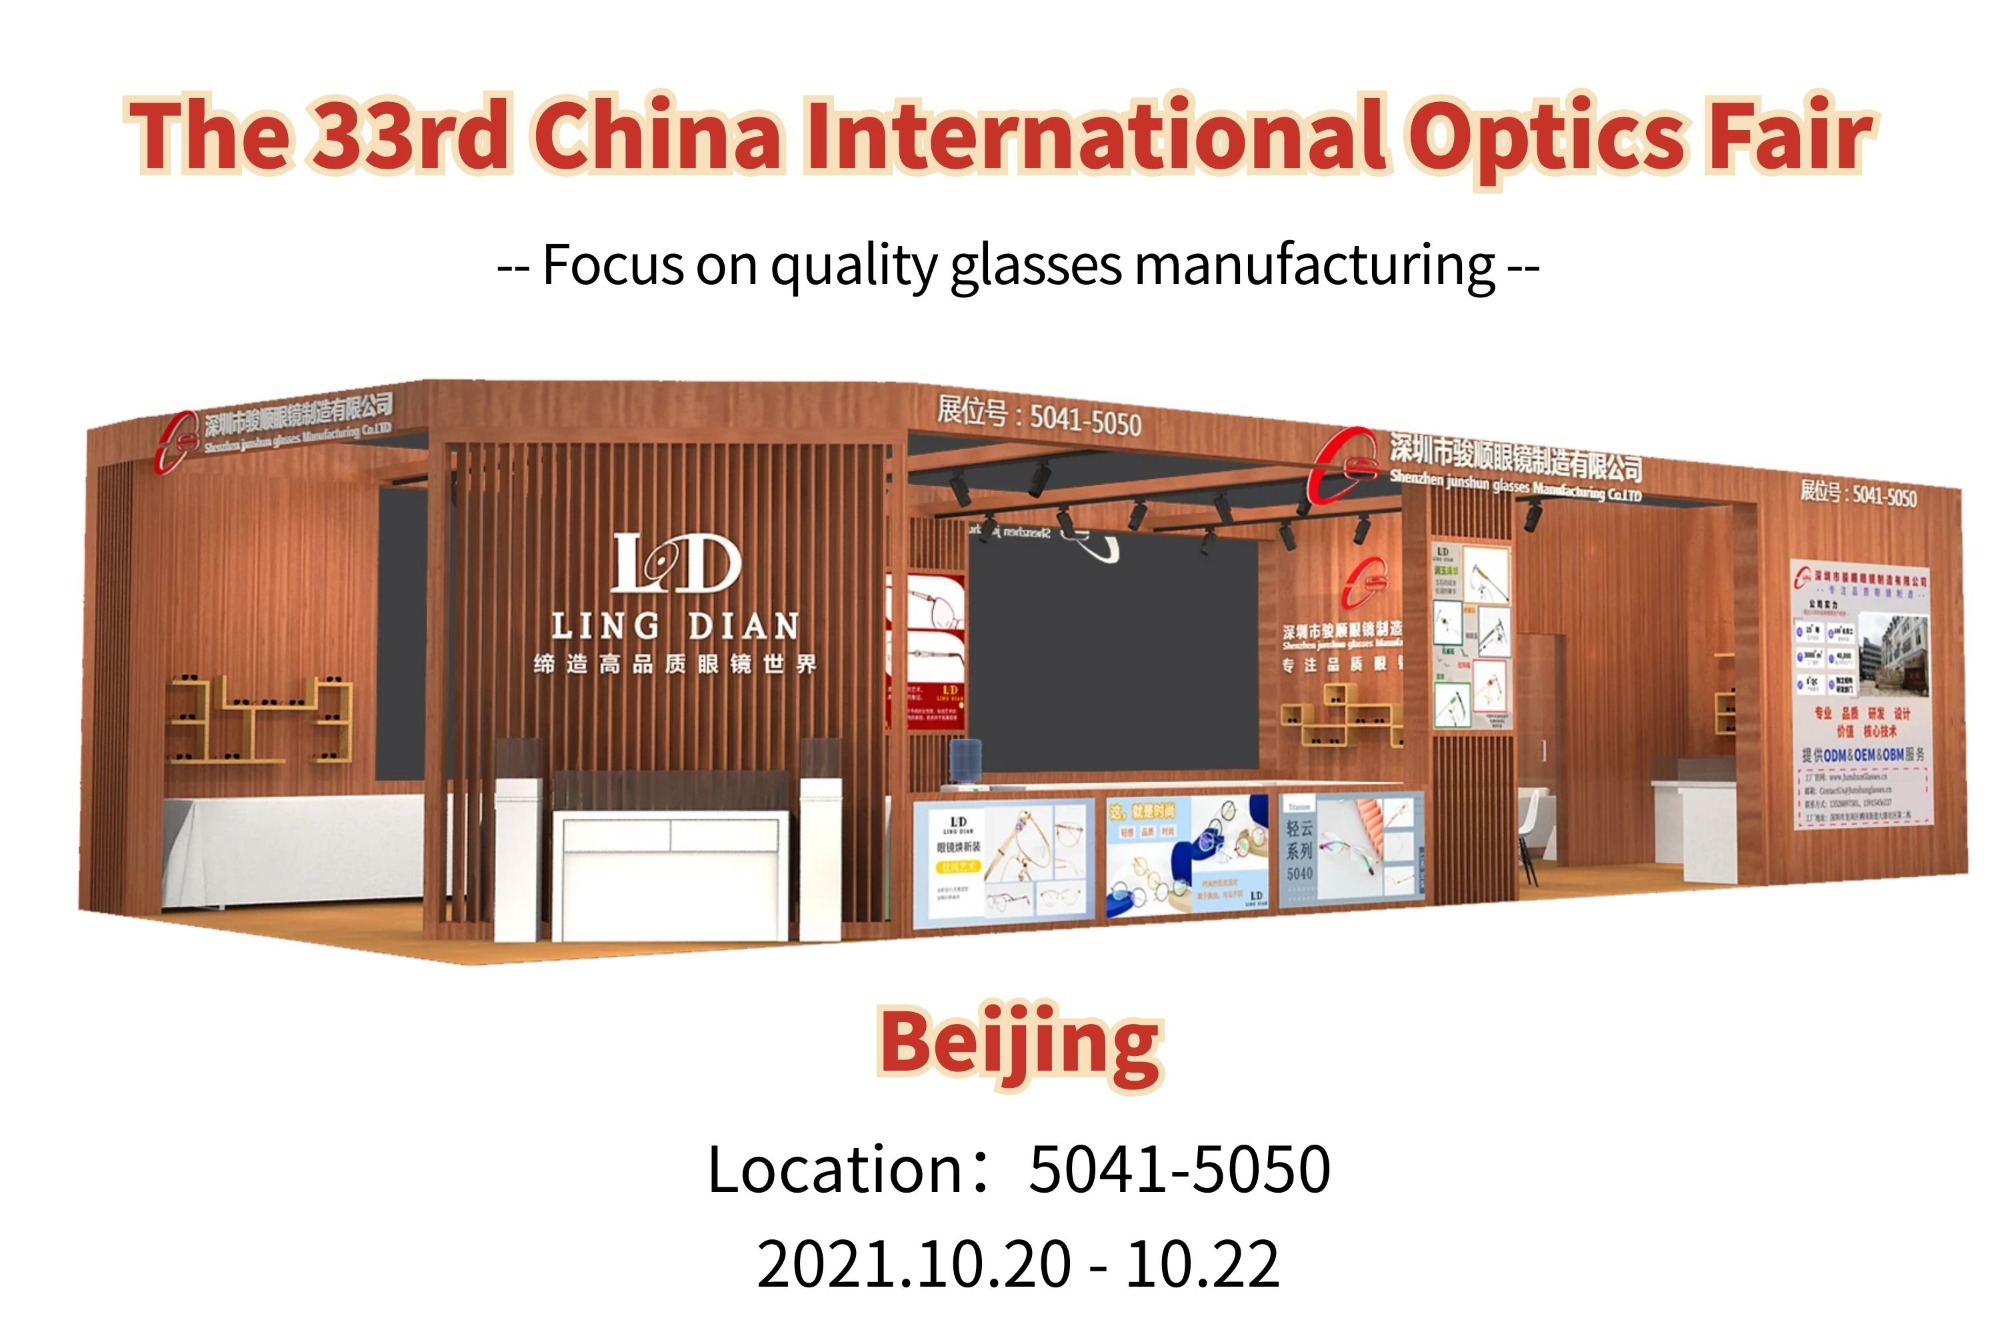 Welcome you all to come and visit us in Beijing!